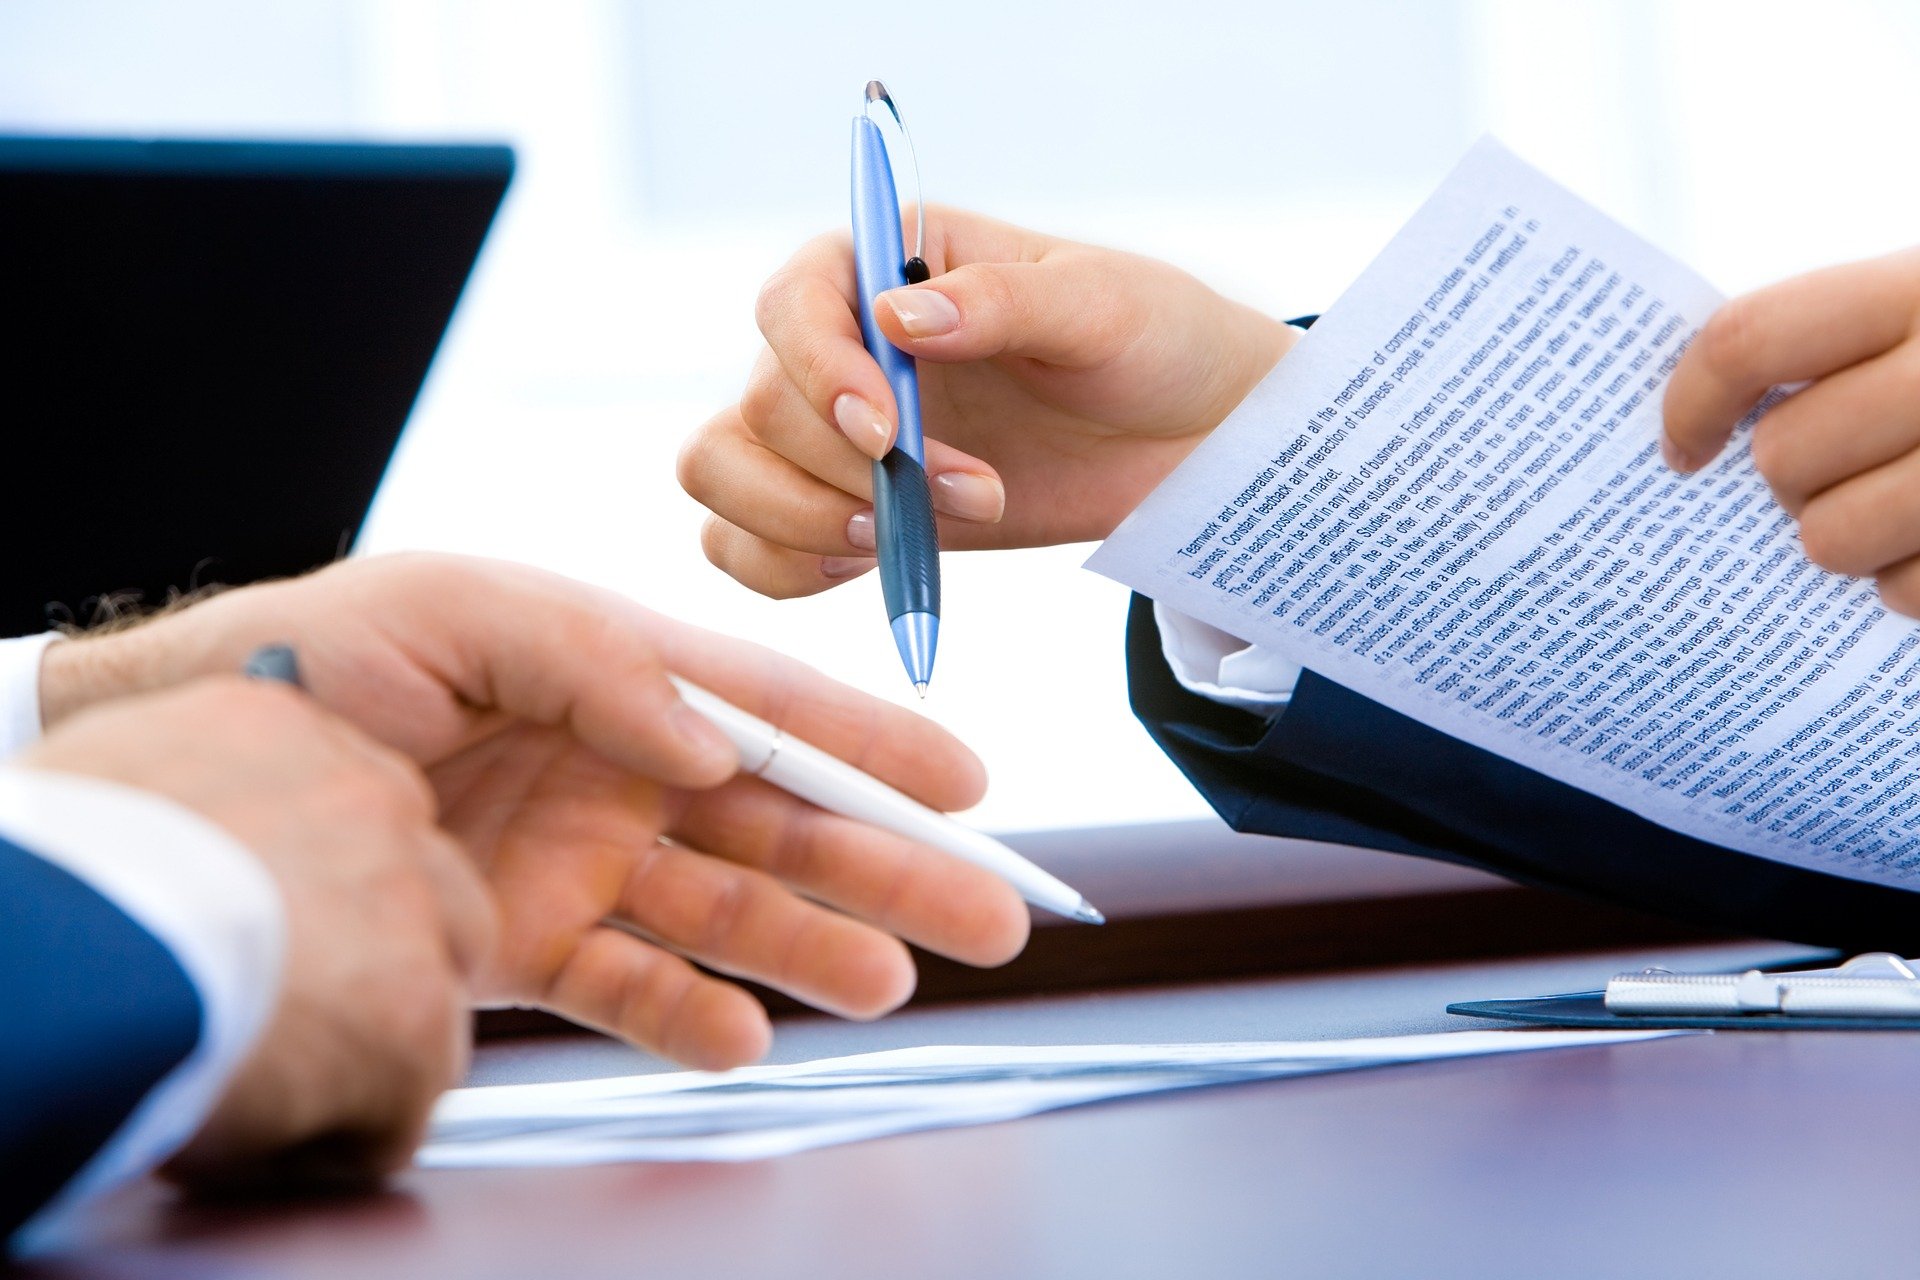 what are the main elements of a contract